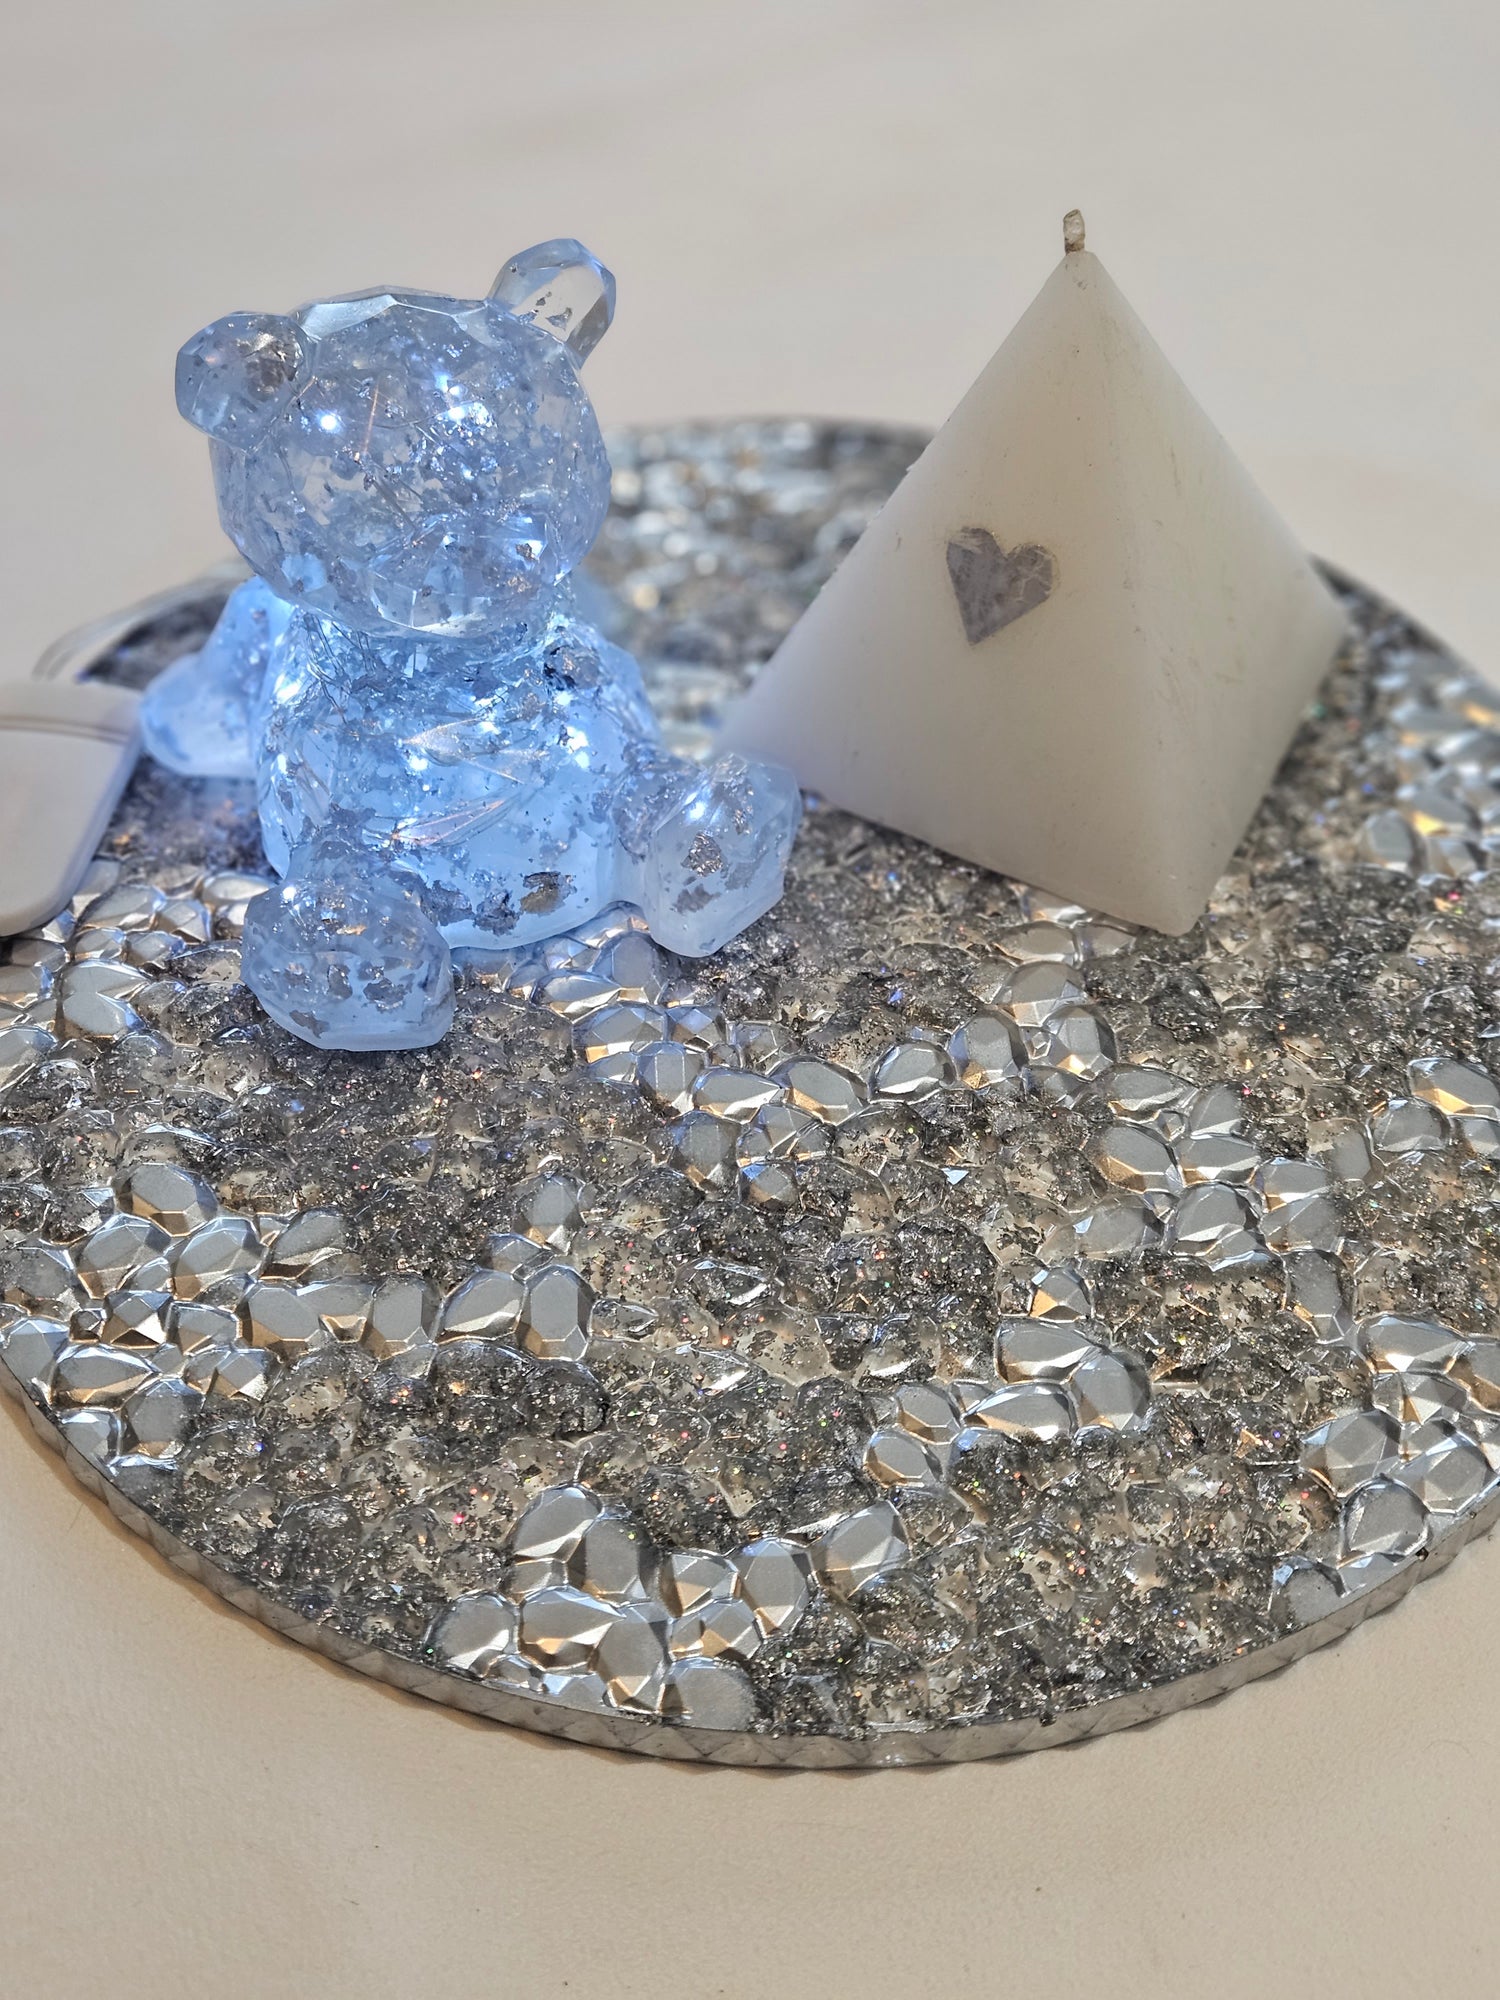 Resin 'Light up" Bear with Silver foil and lights